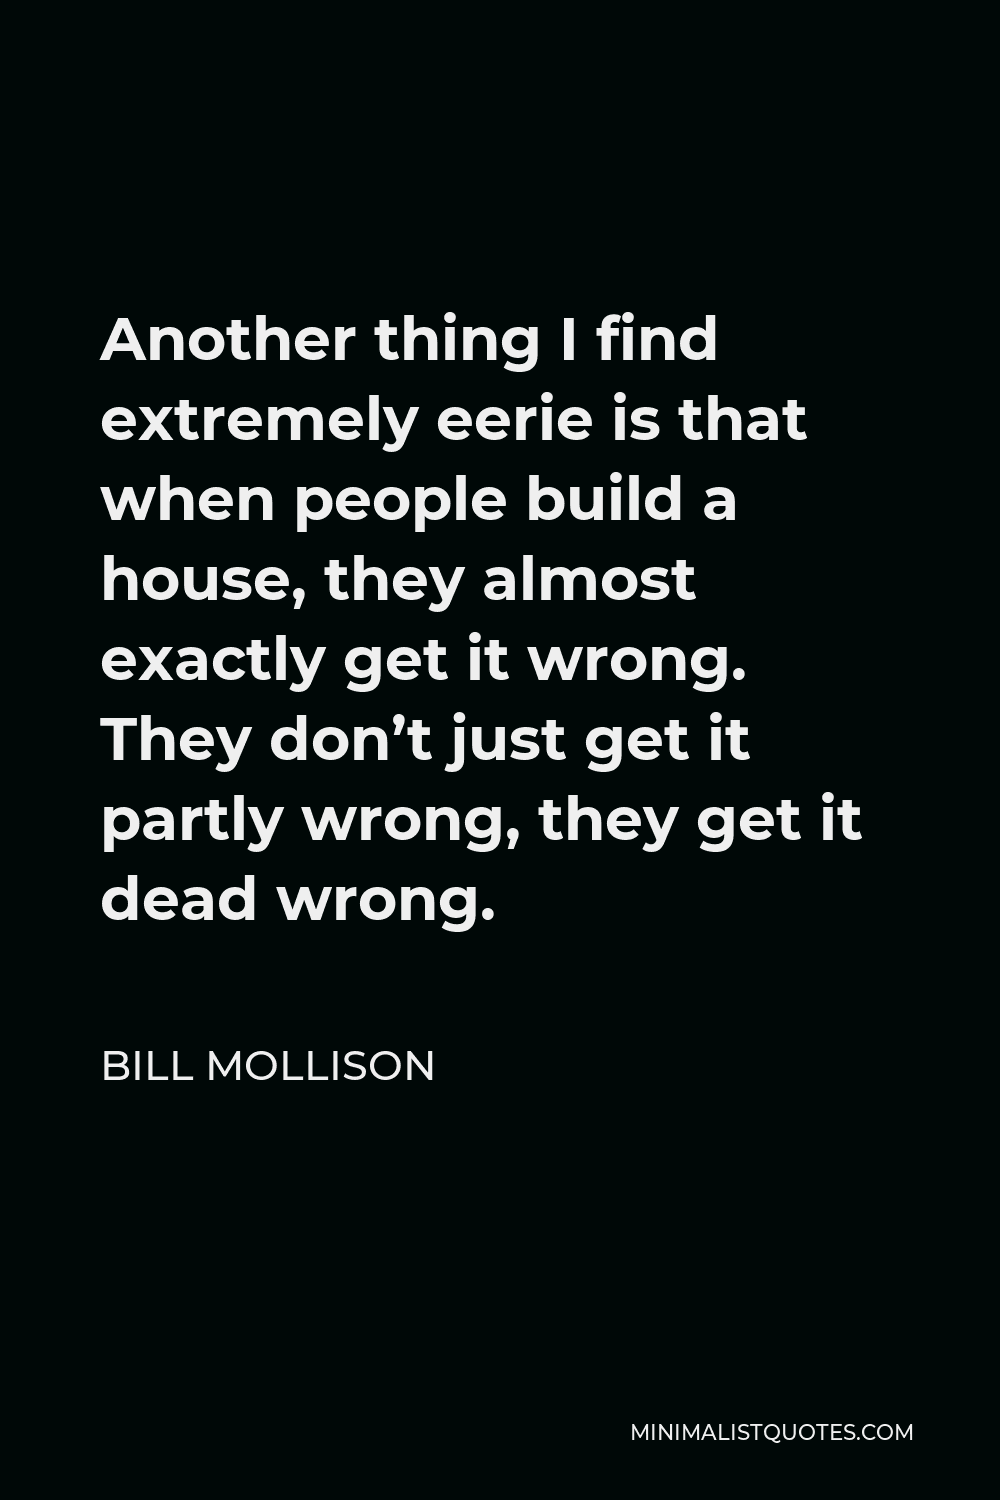 Bill Mollison Quote - Another thing I find extremely eerie is that when people build a house, they almost exactly get it wrong. They don’t just get it partly wrong, they get it dead wrong.